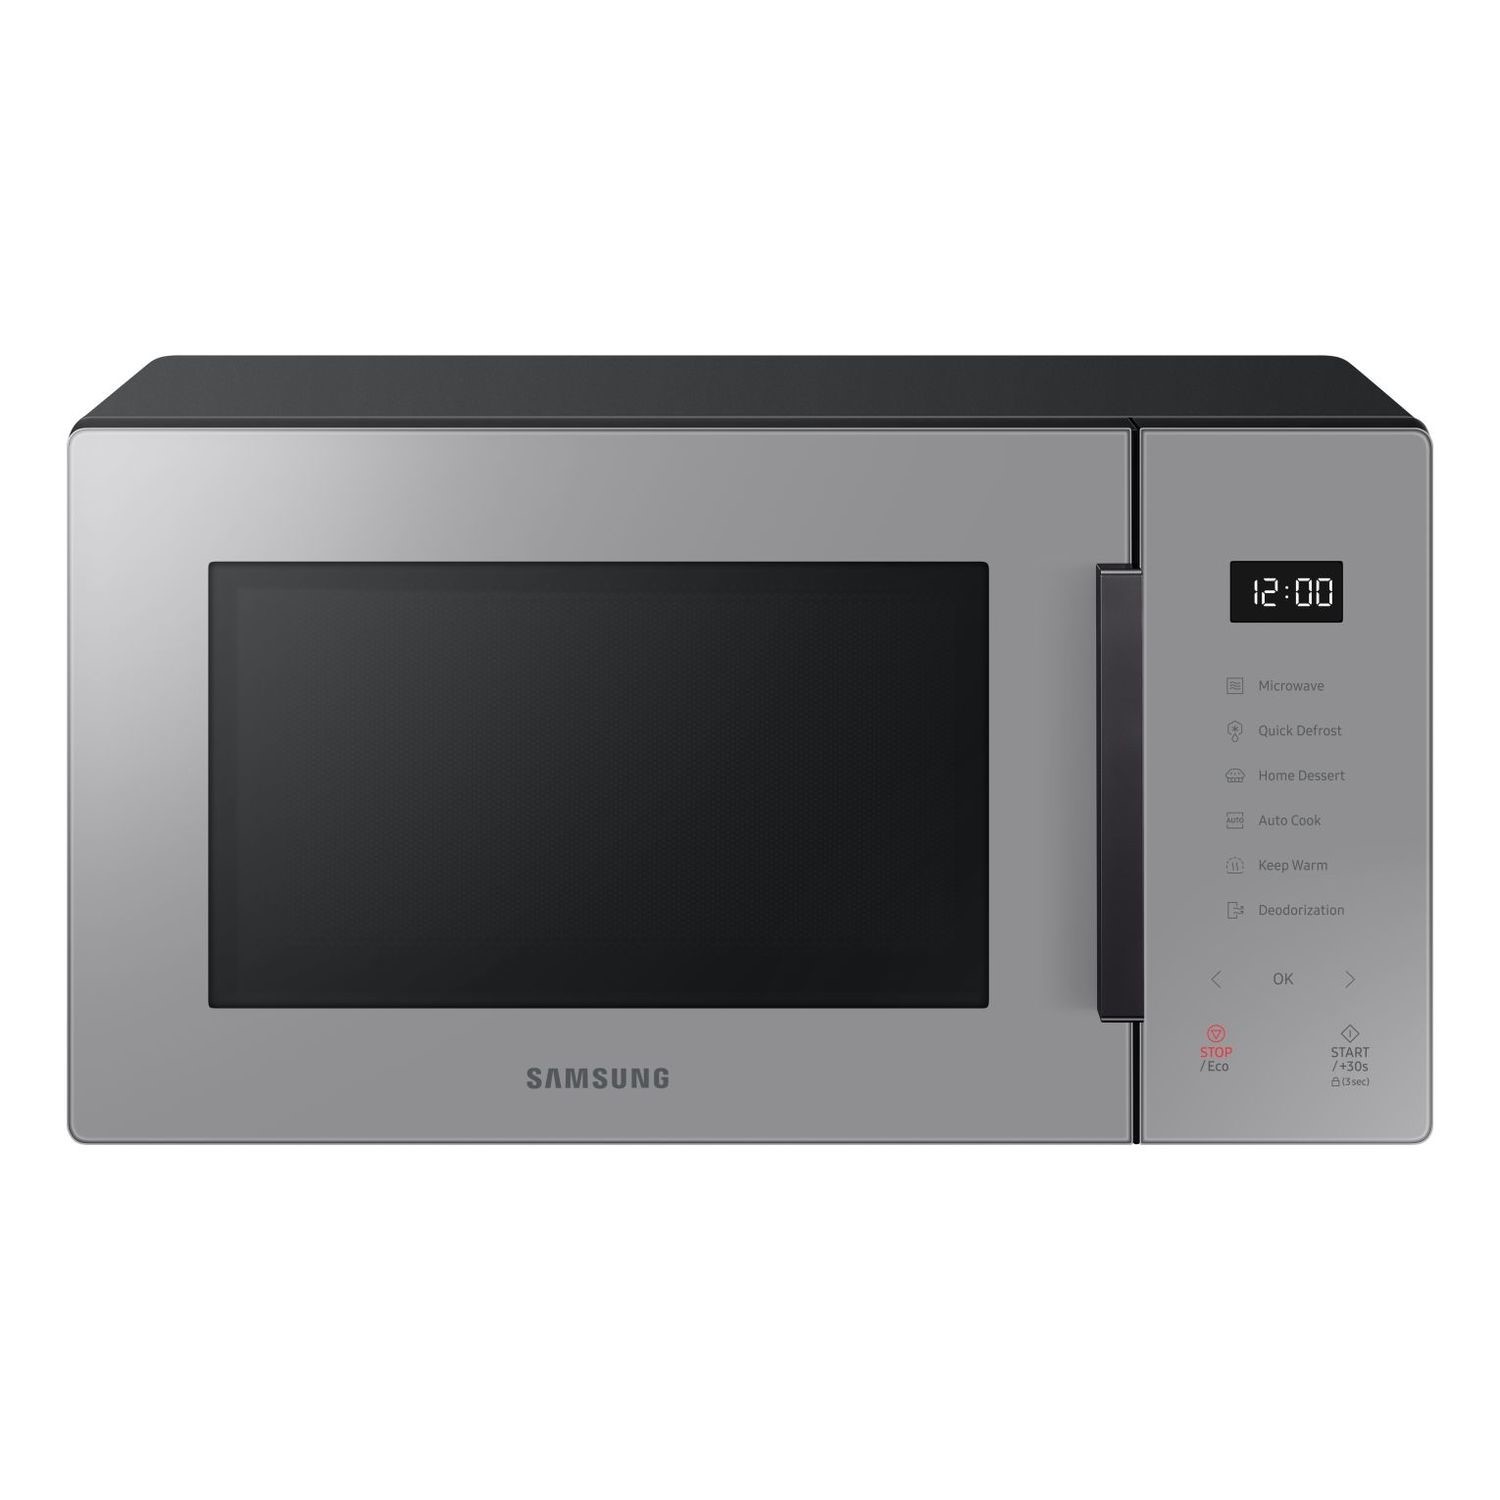 Samsung 23L Glass Front Solo Microwave - Grey